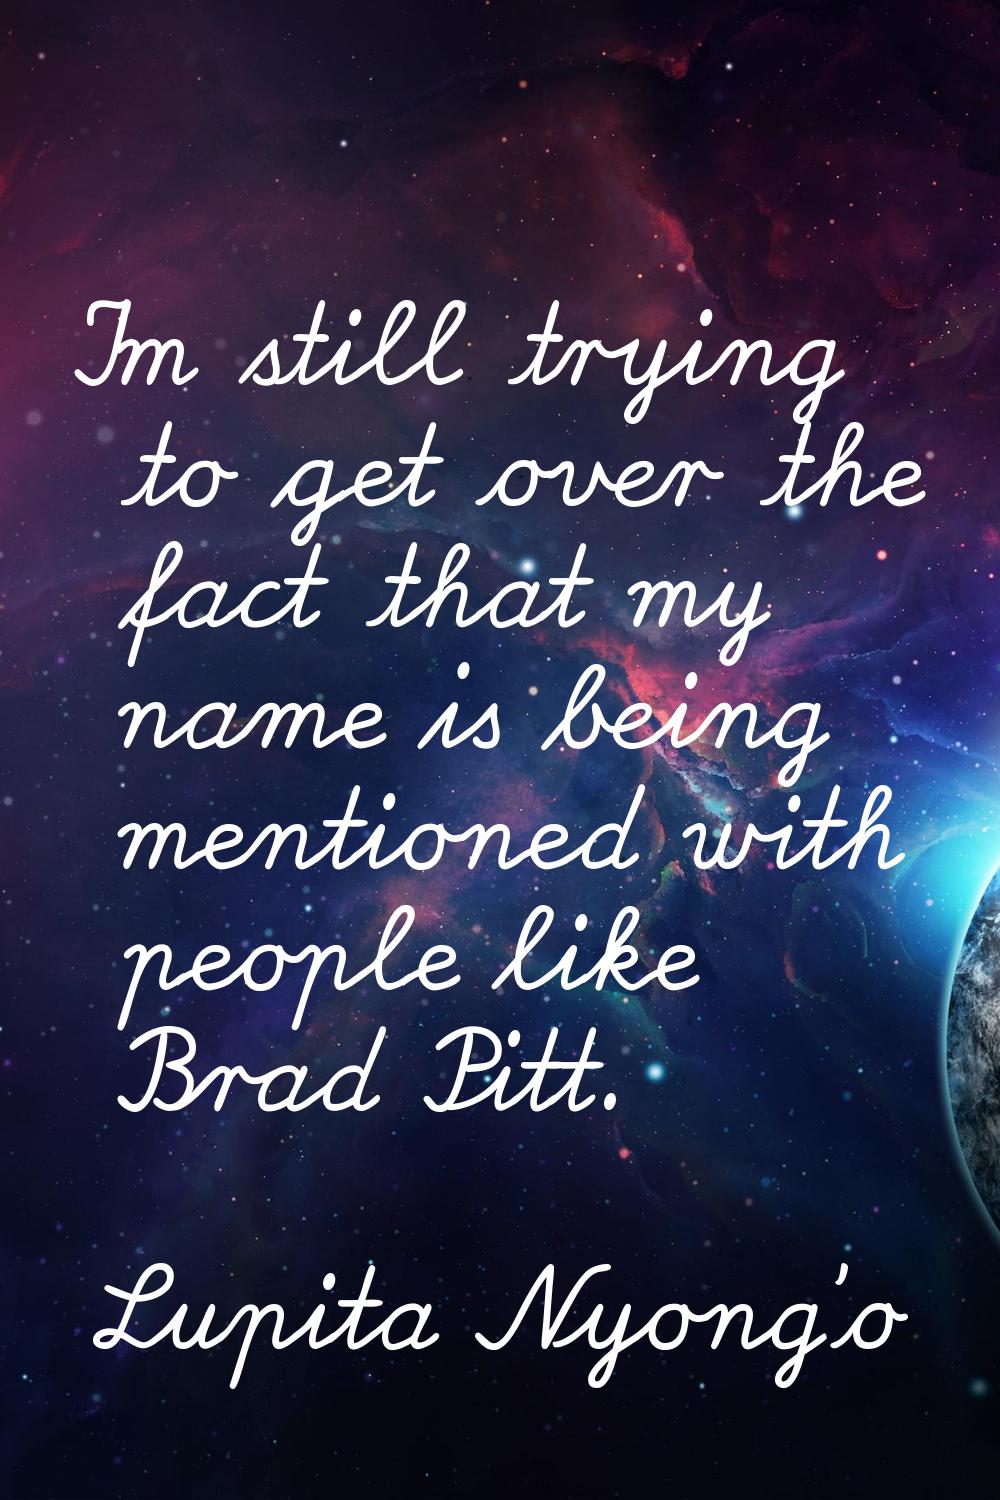 I'm still trying to get over the fact that my name is being mentioned with people like Brad Pitt.